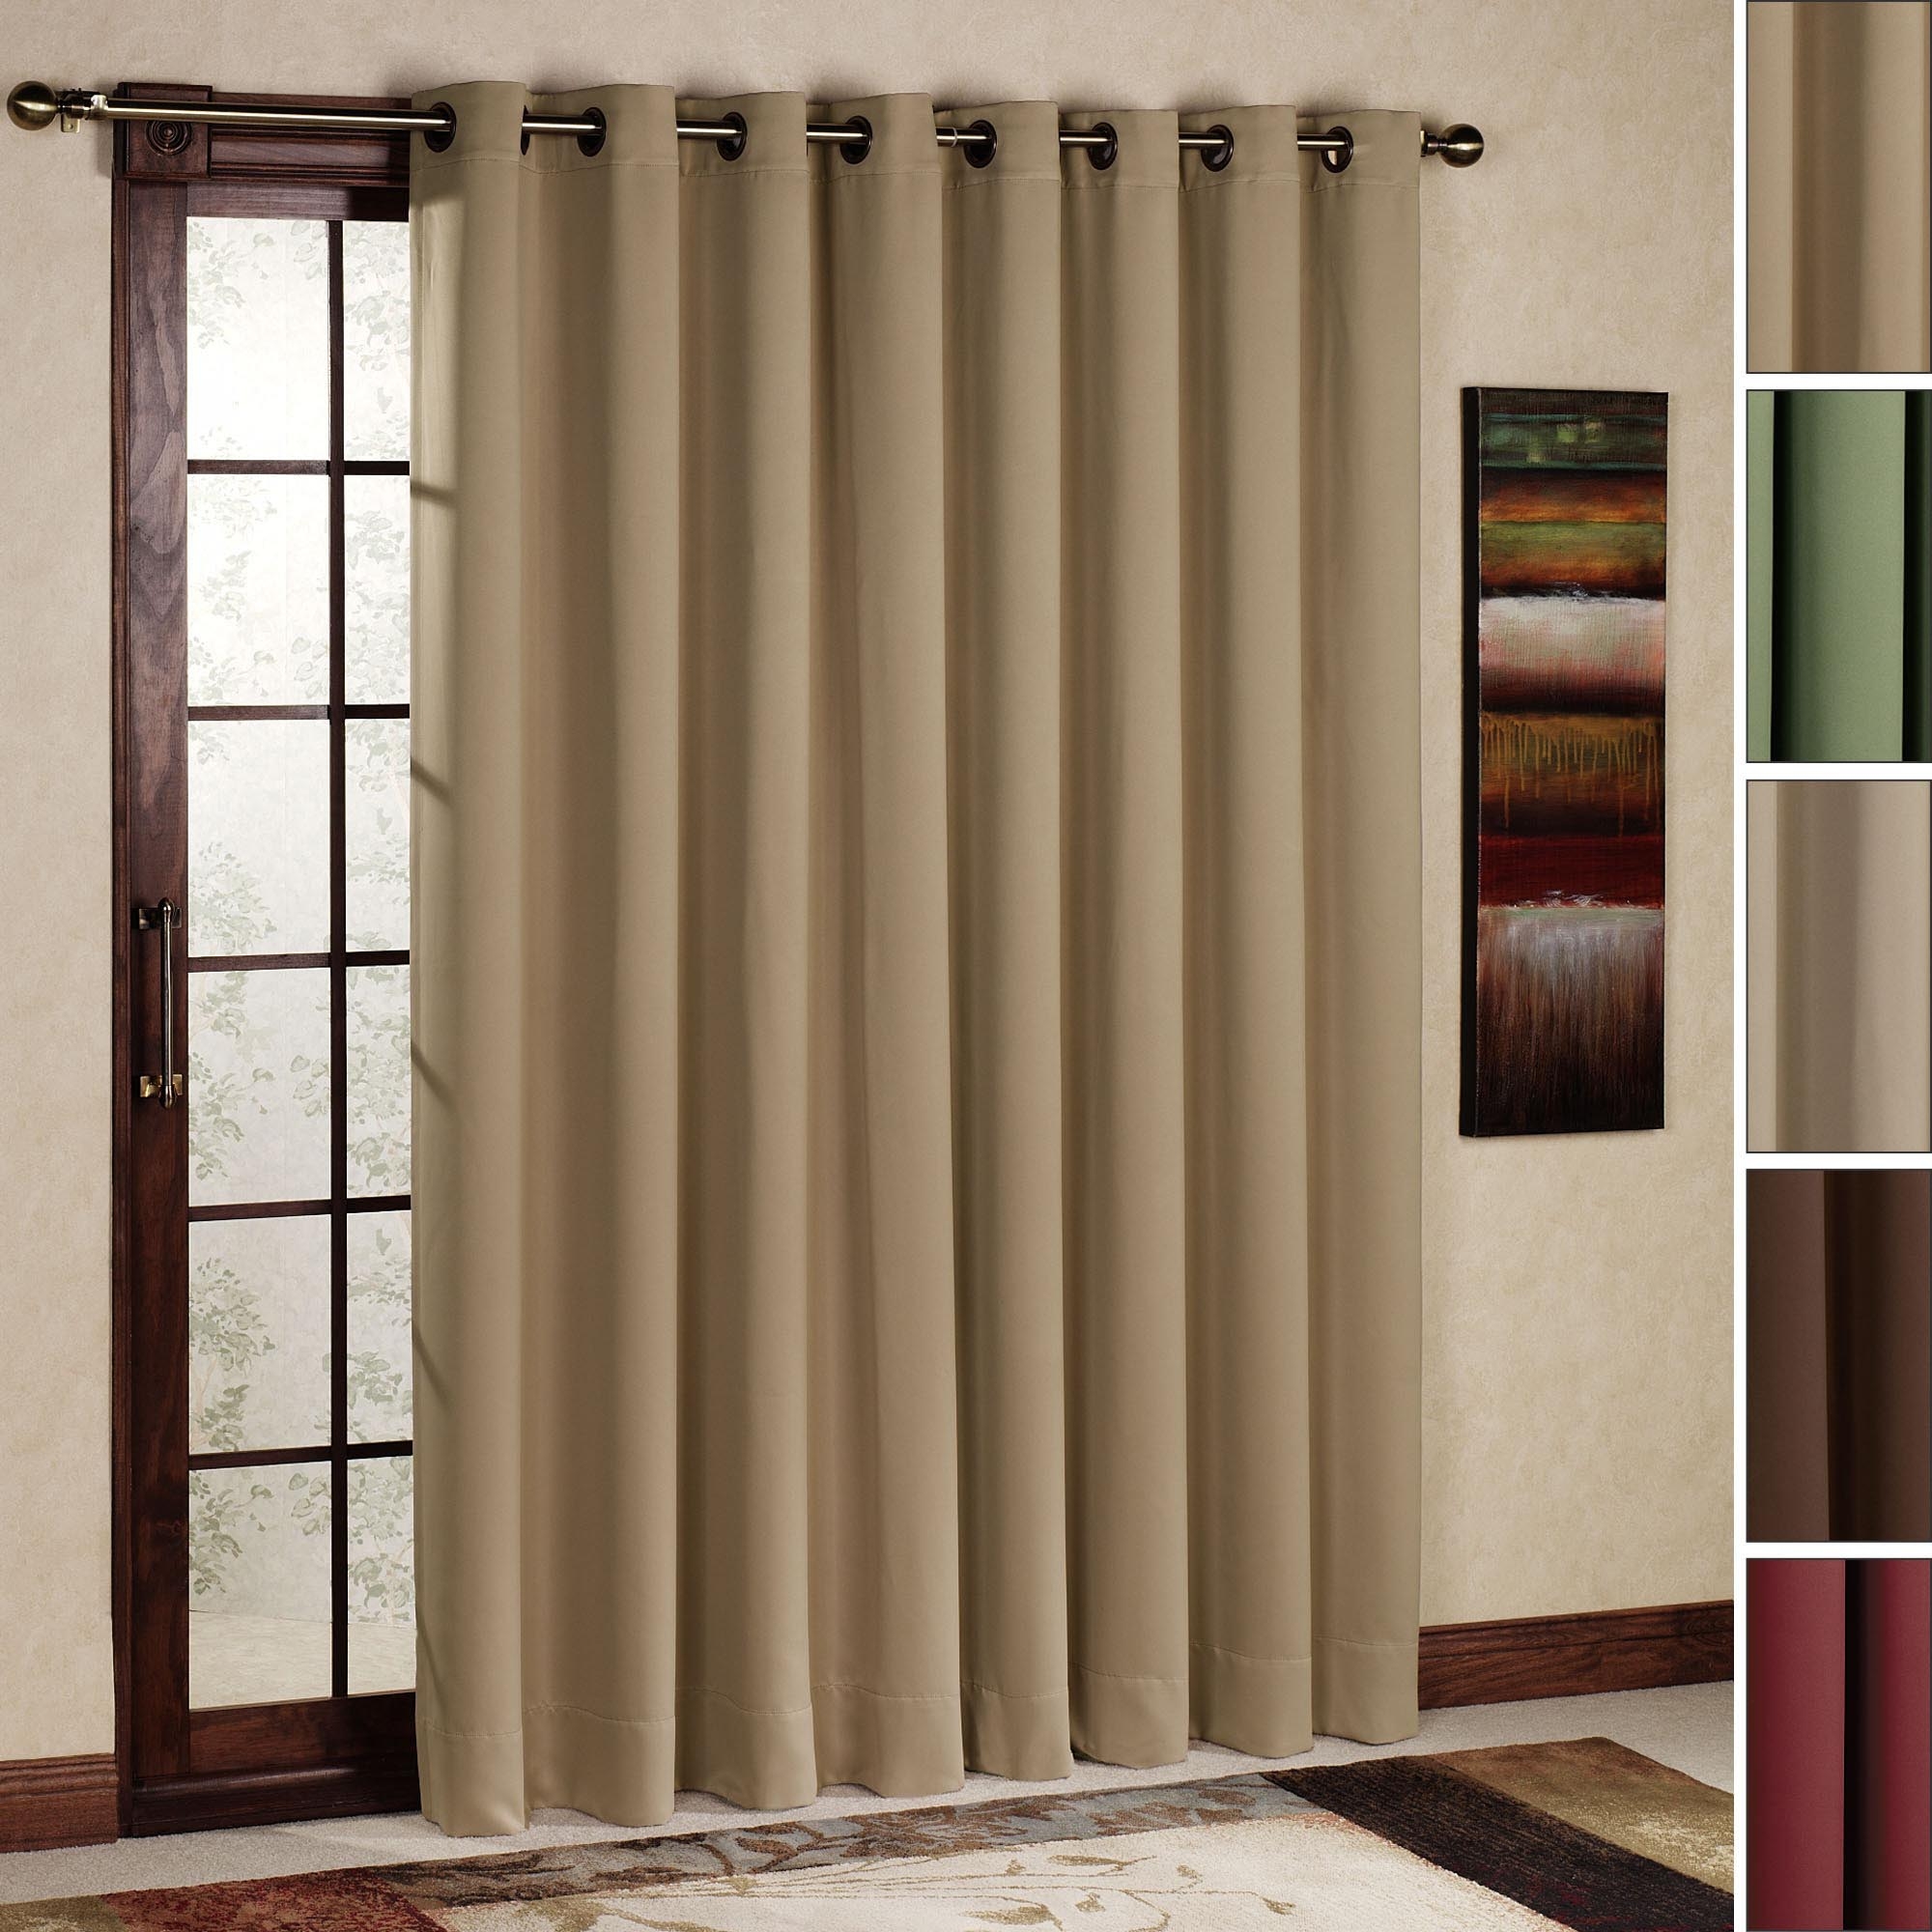 Size Of Sliding Glass Door Curtainscurtains for sliding patio doors curtain rod size for sliding